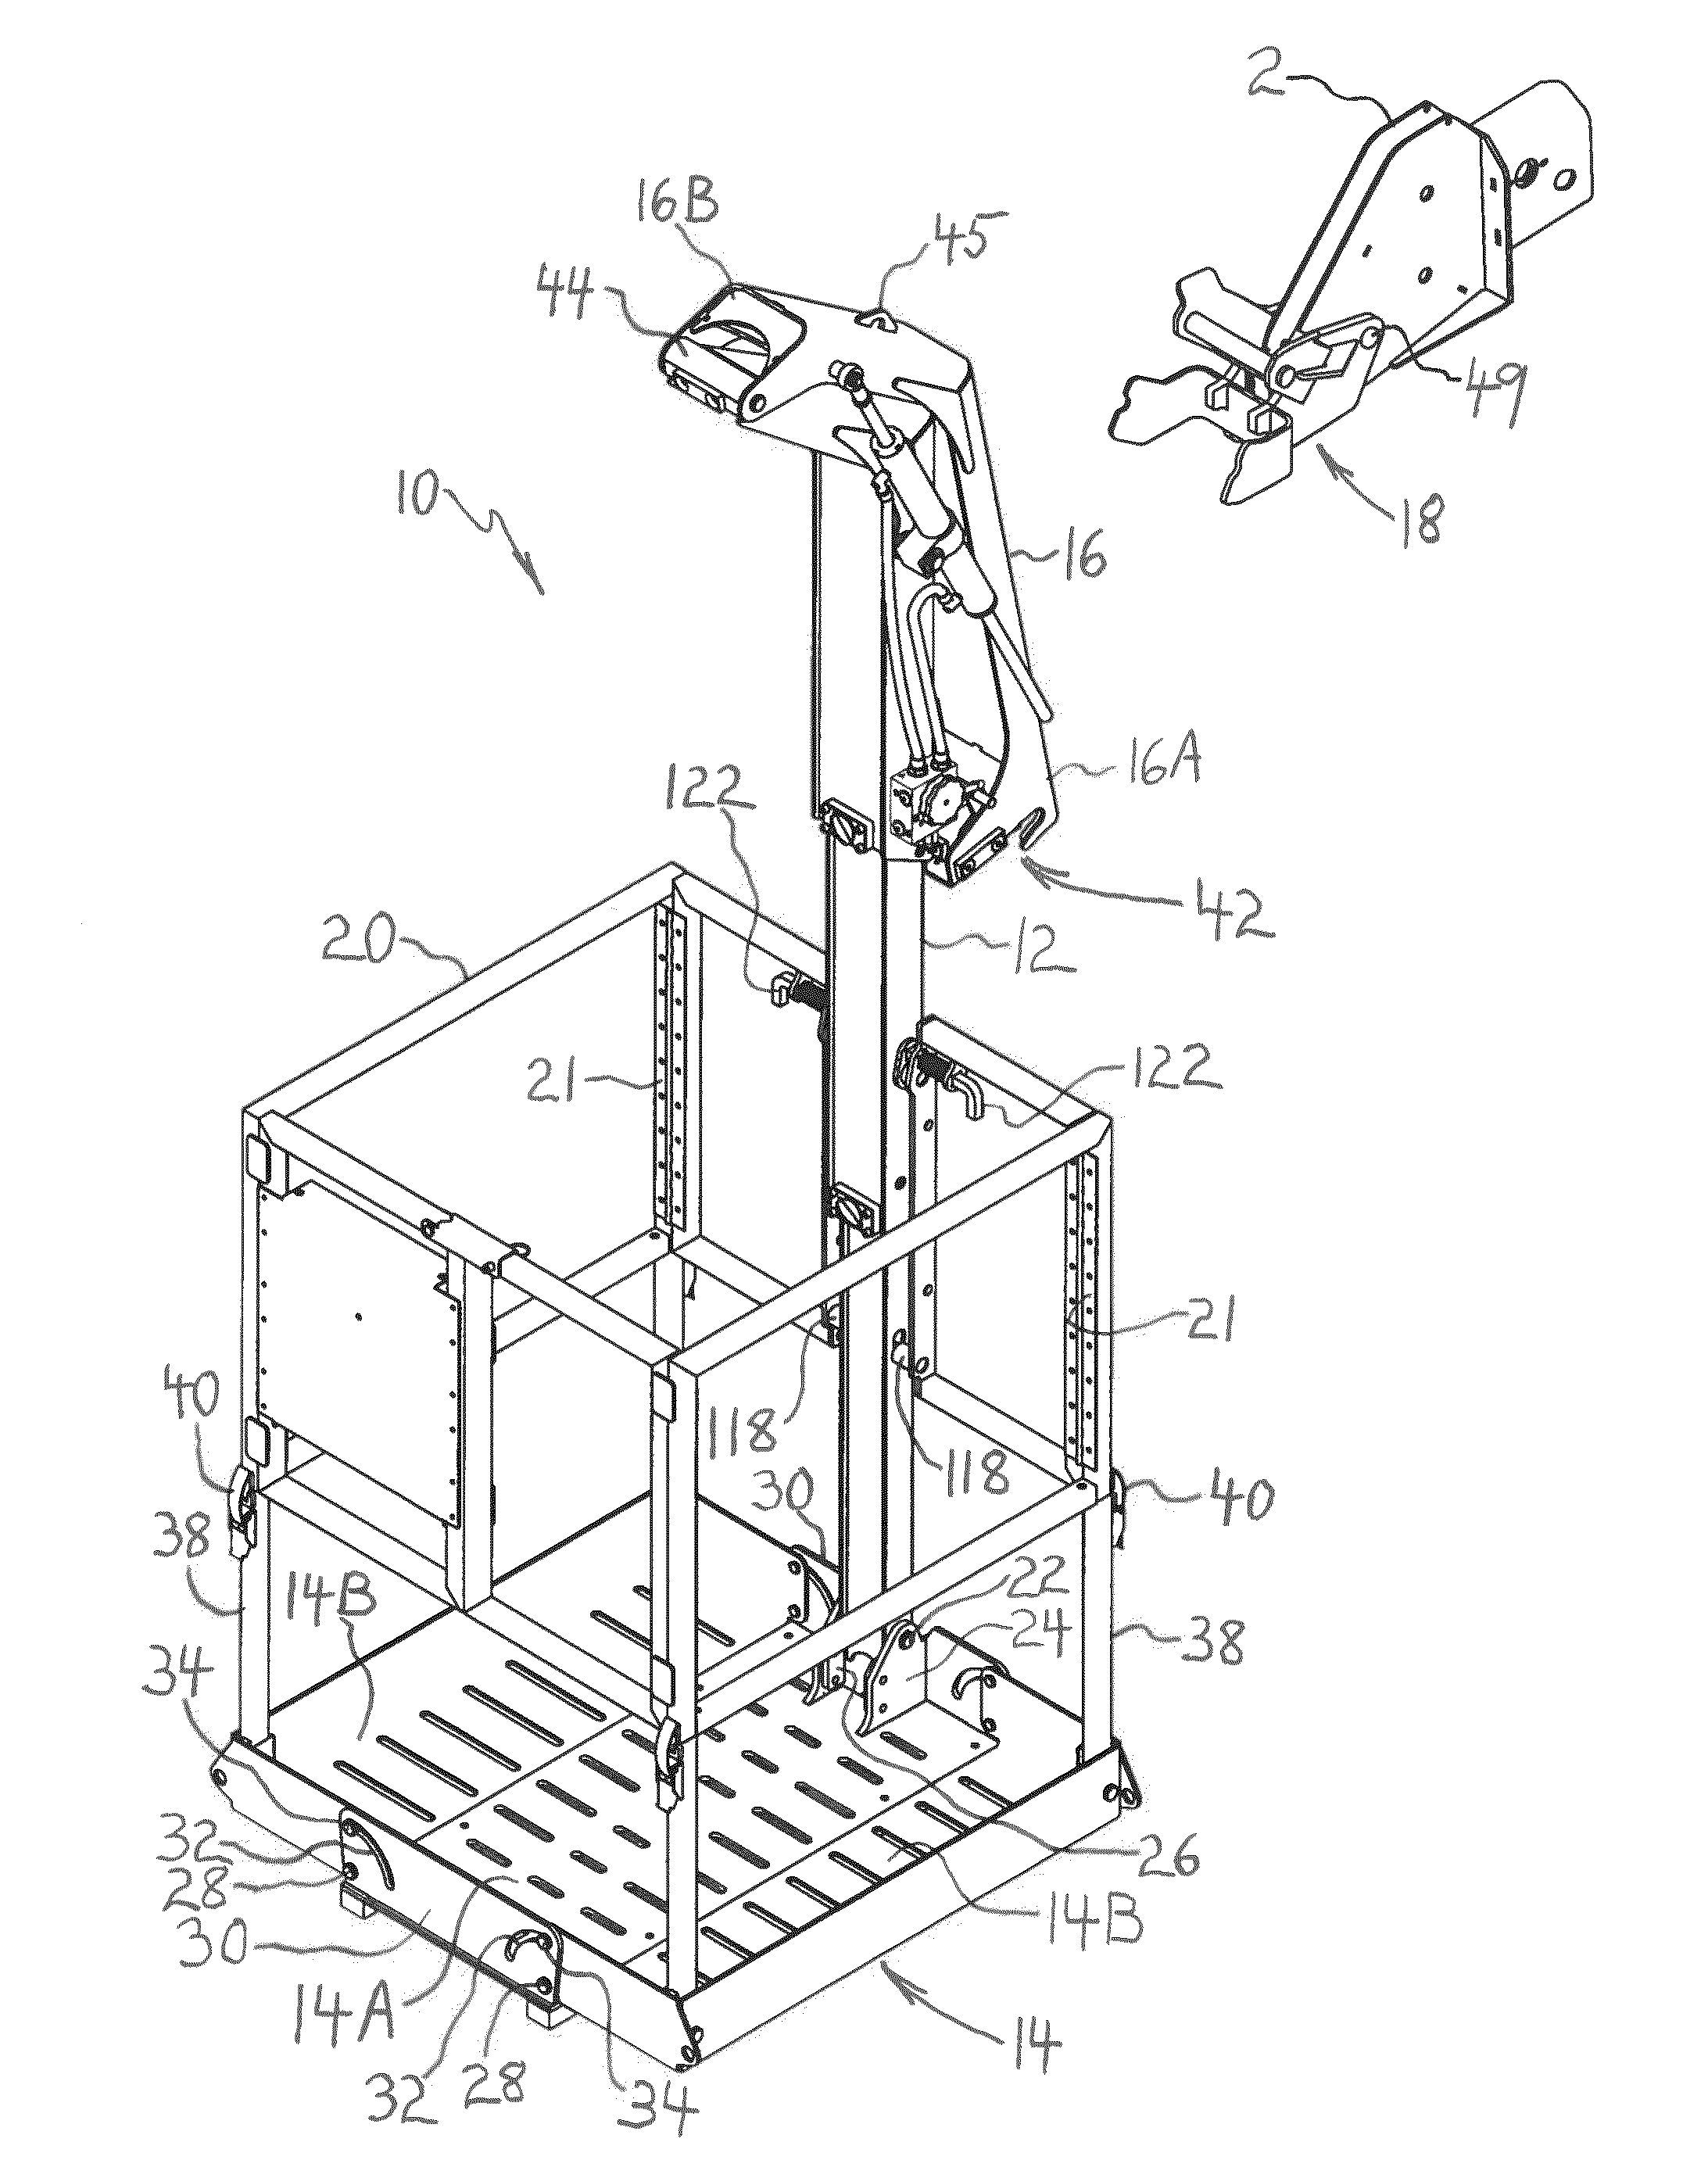 Collapsible personnel basket for a crane